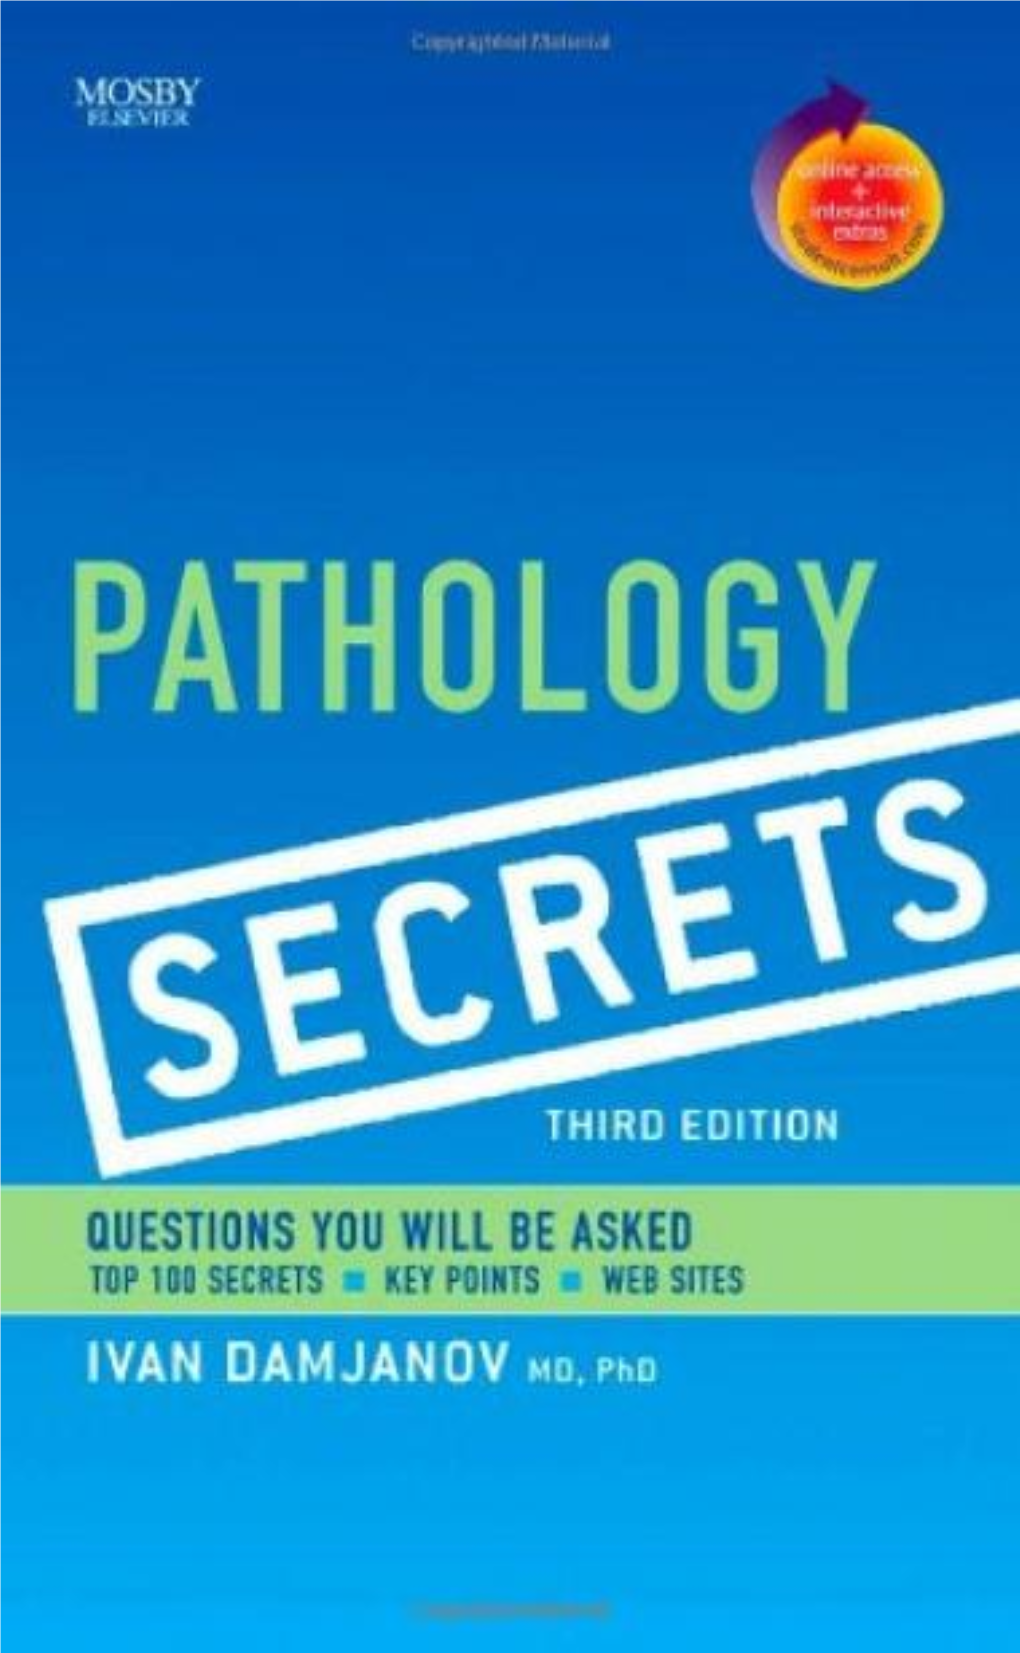 PATHOLOGY SECRETS, THIRD EDITION ISBN: 978-0-323-05594-9 Copyright Q 2009 by Mosby, Inc., an Affiliate of Elsevier Inc